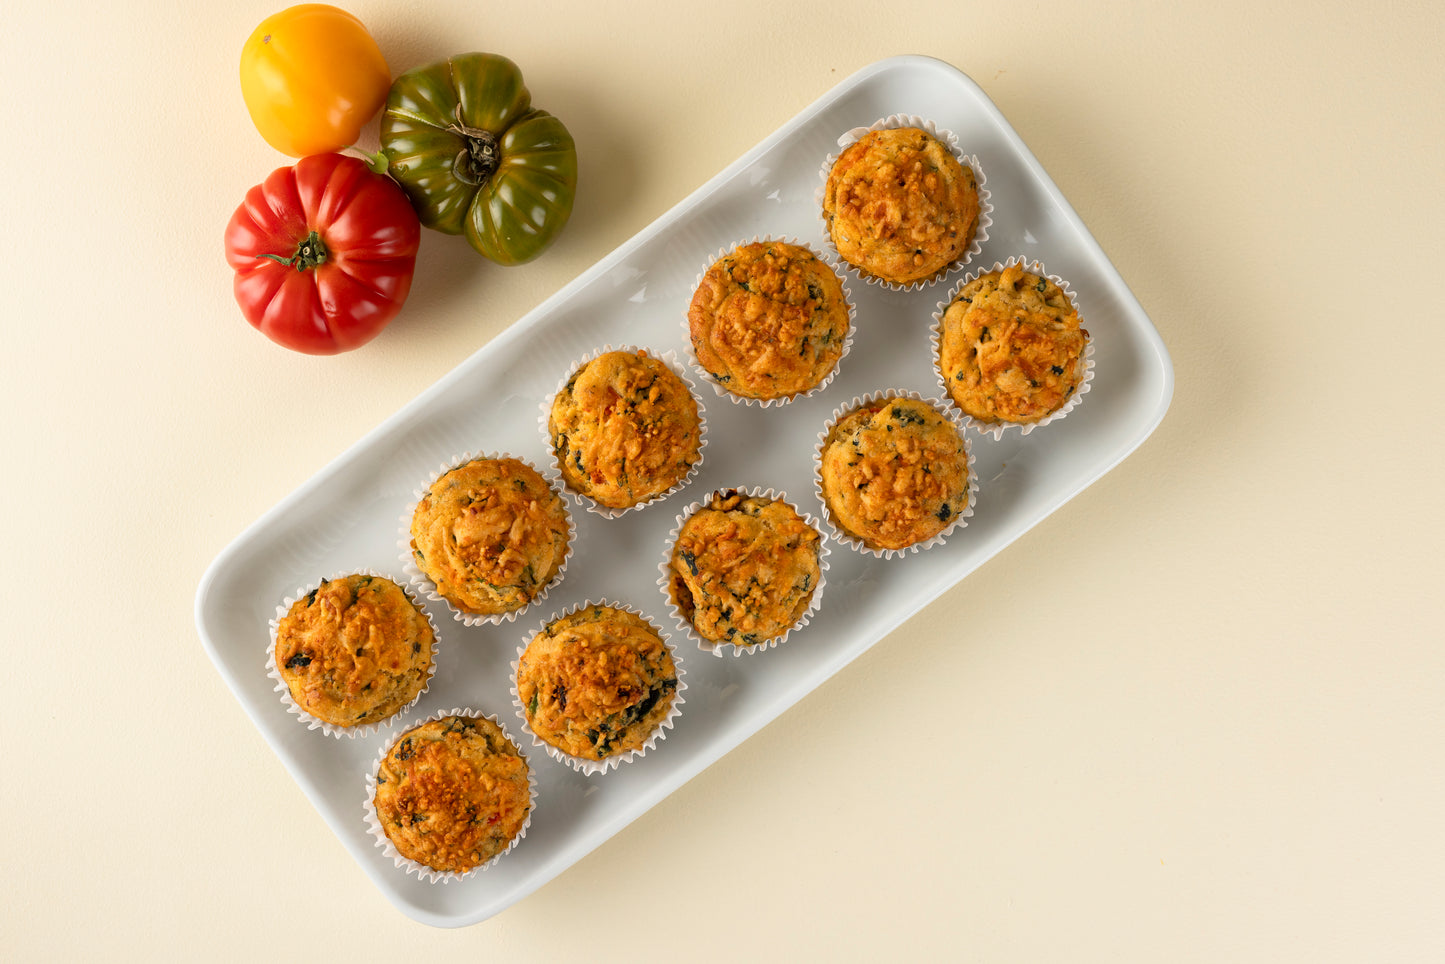 Meetings & Events - 12 Savoury Muffins